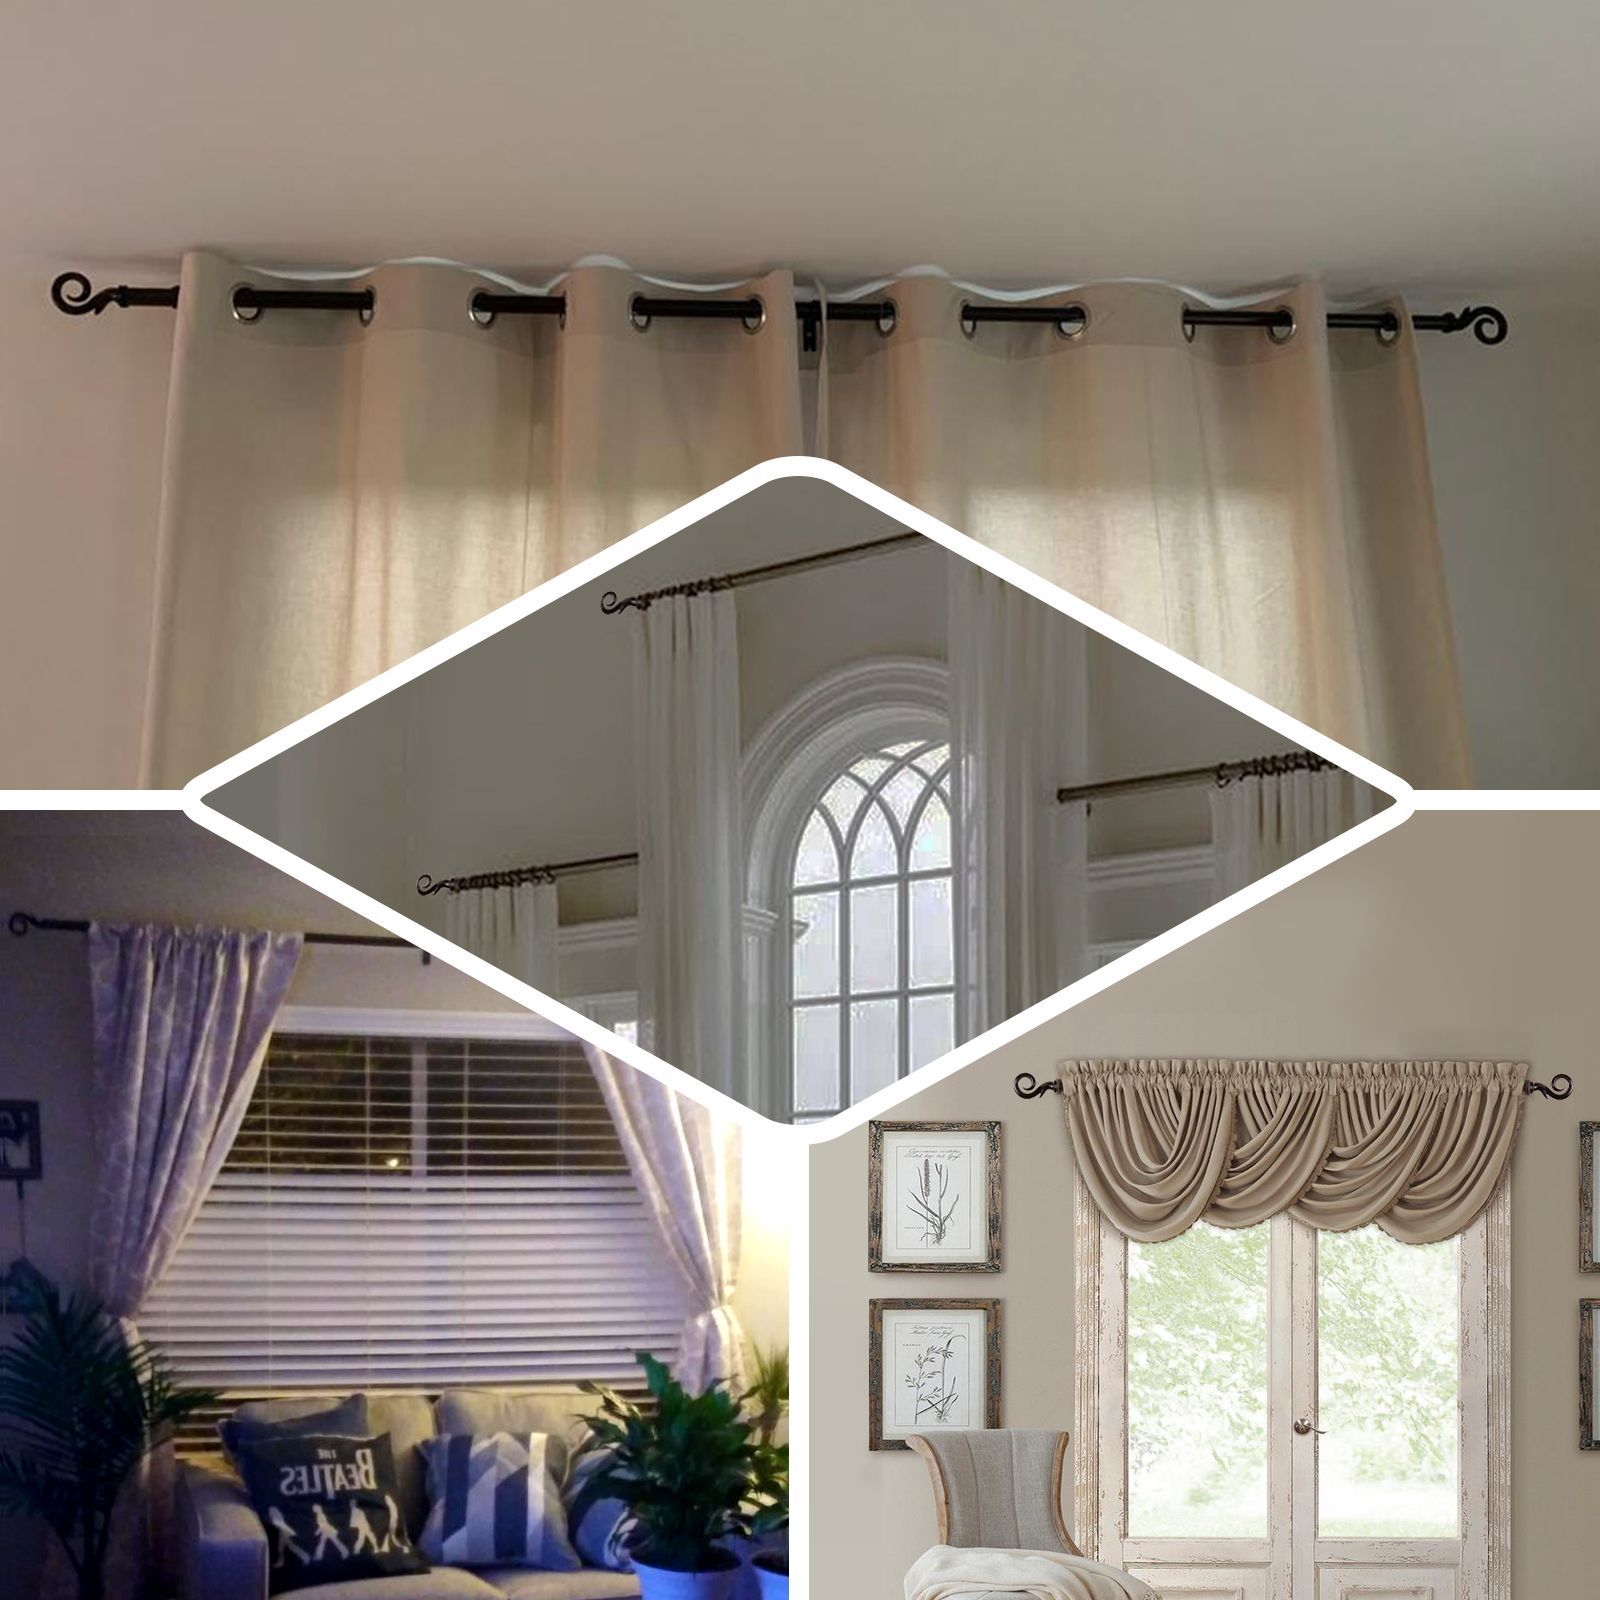 Curtain rods and drapery hardware